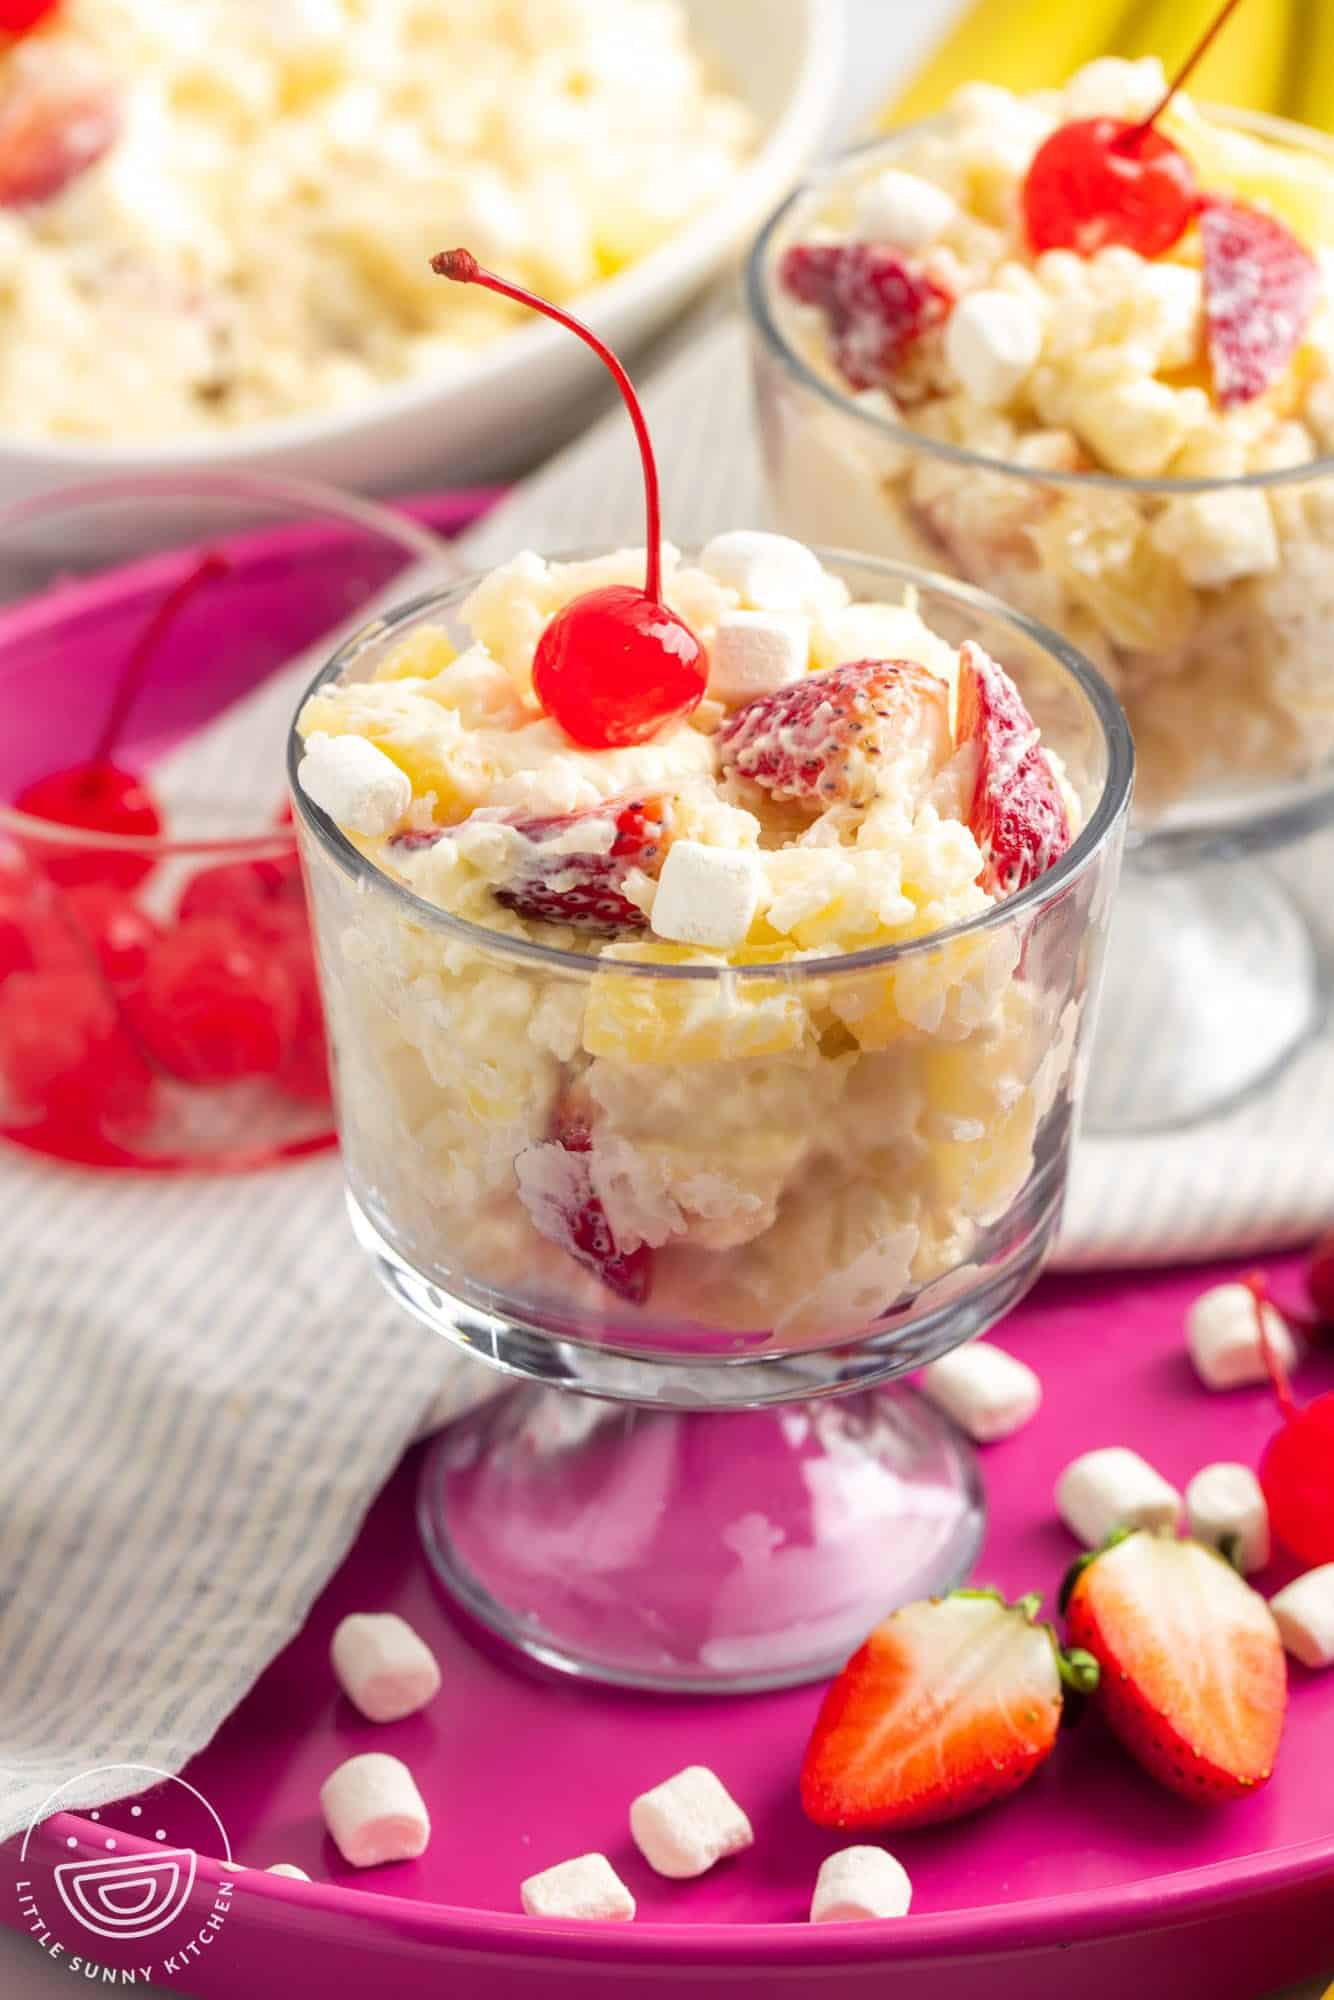 a footed glass dessert dish filled with creamy glorified rice with fruit and marshmallows. Topped with a maraschino cherry.